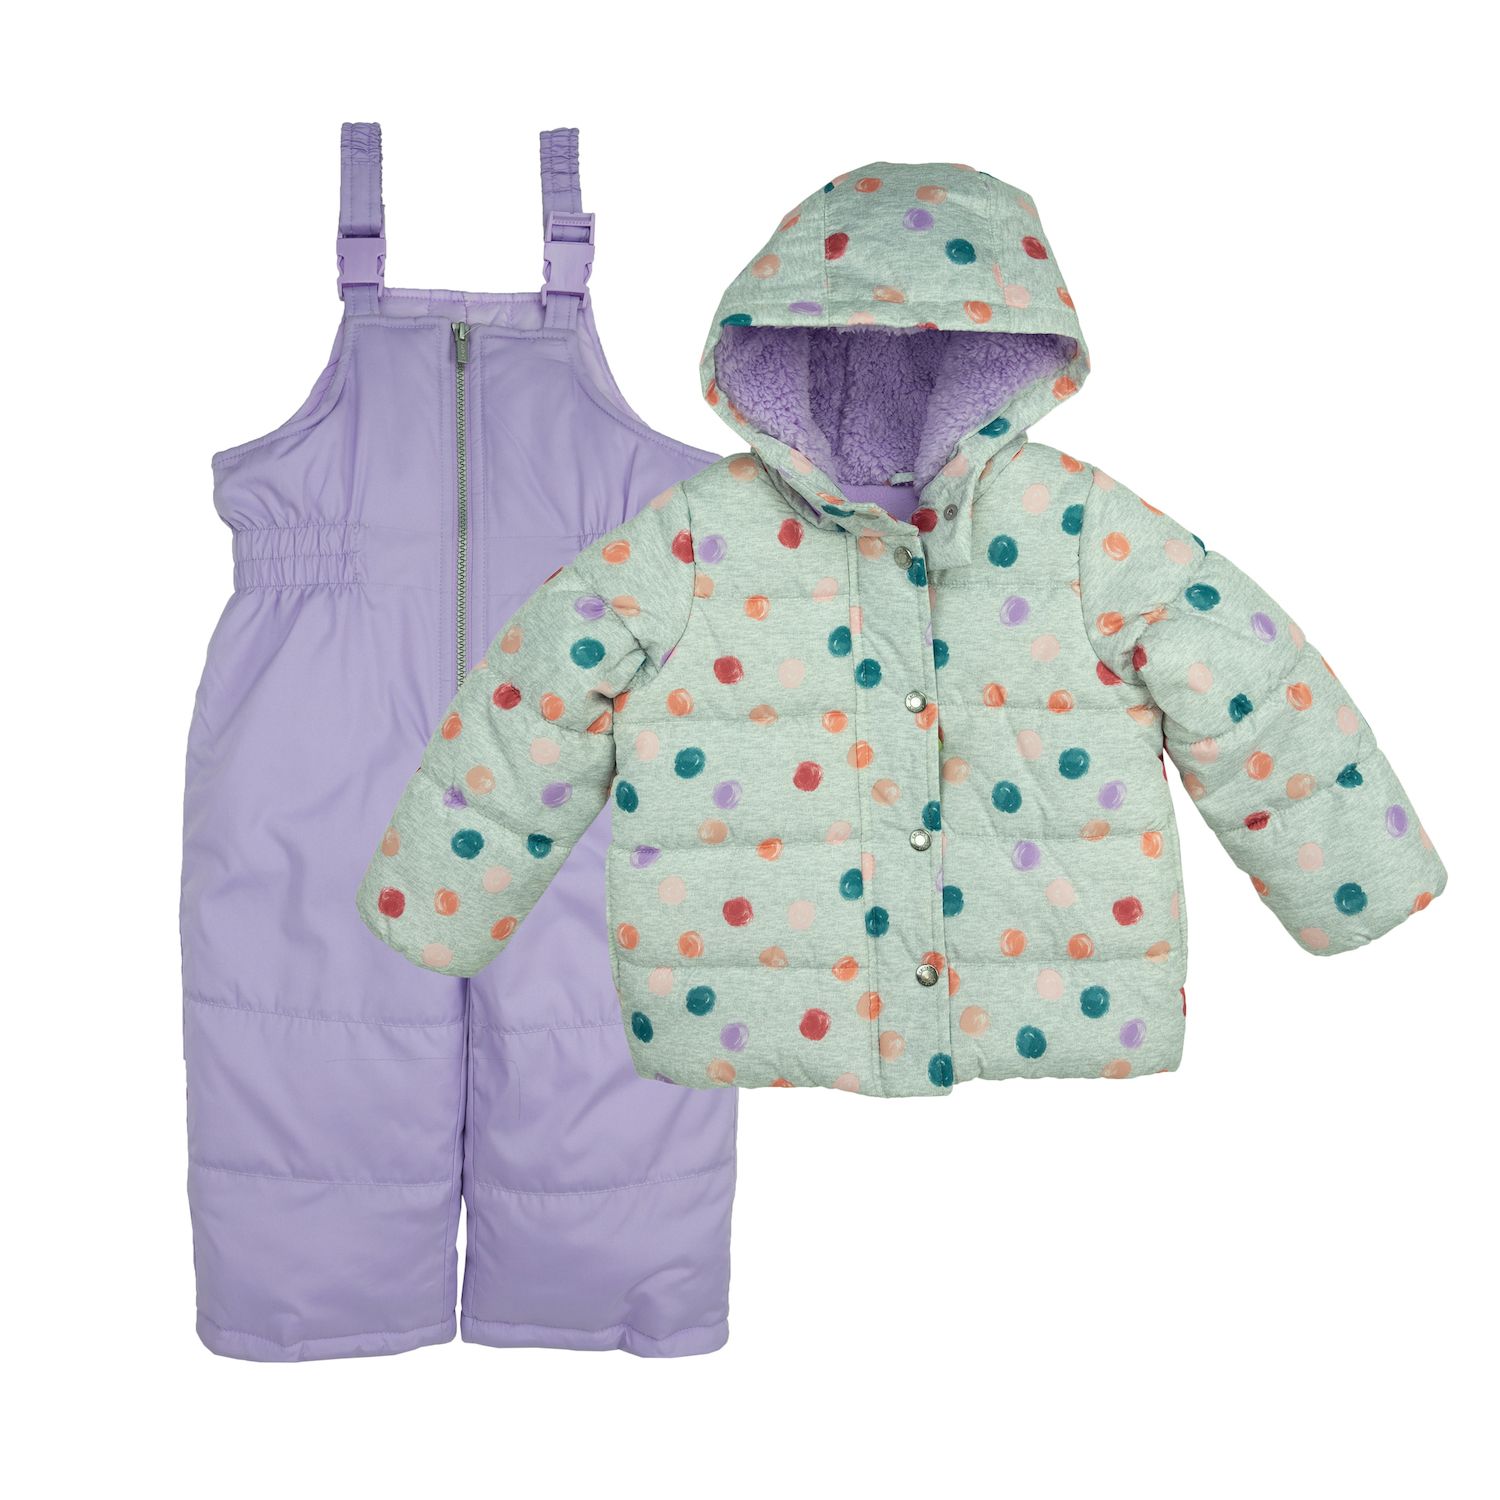 snow jacket for baby